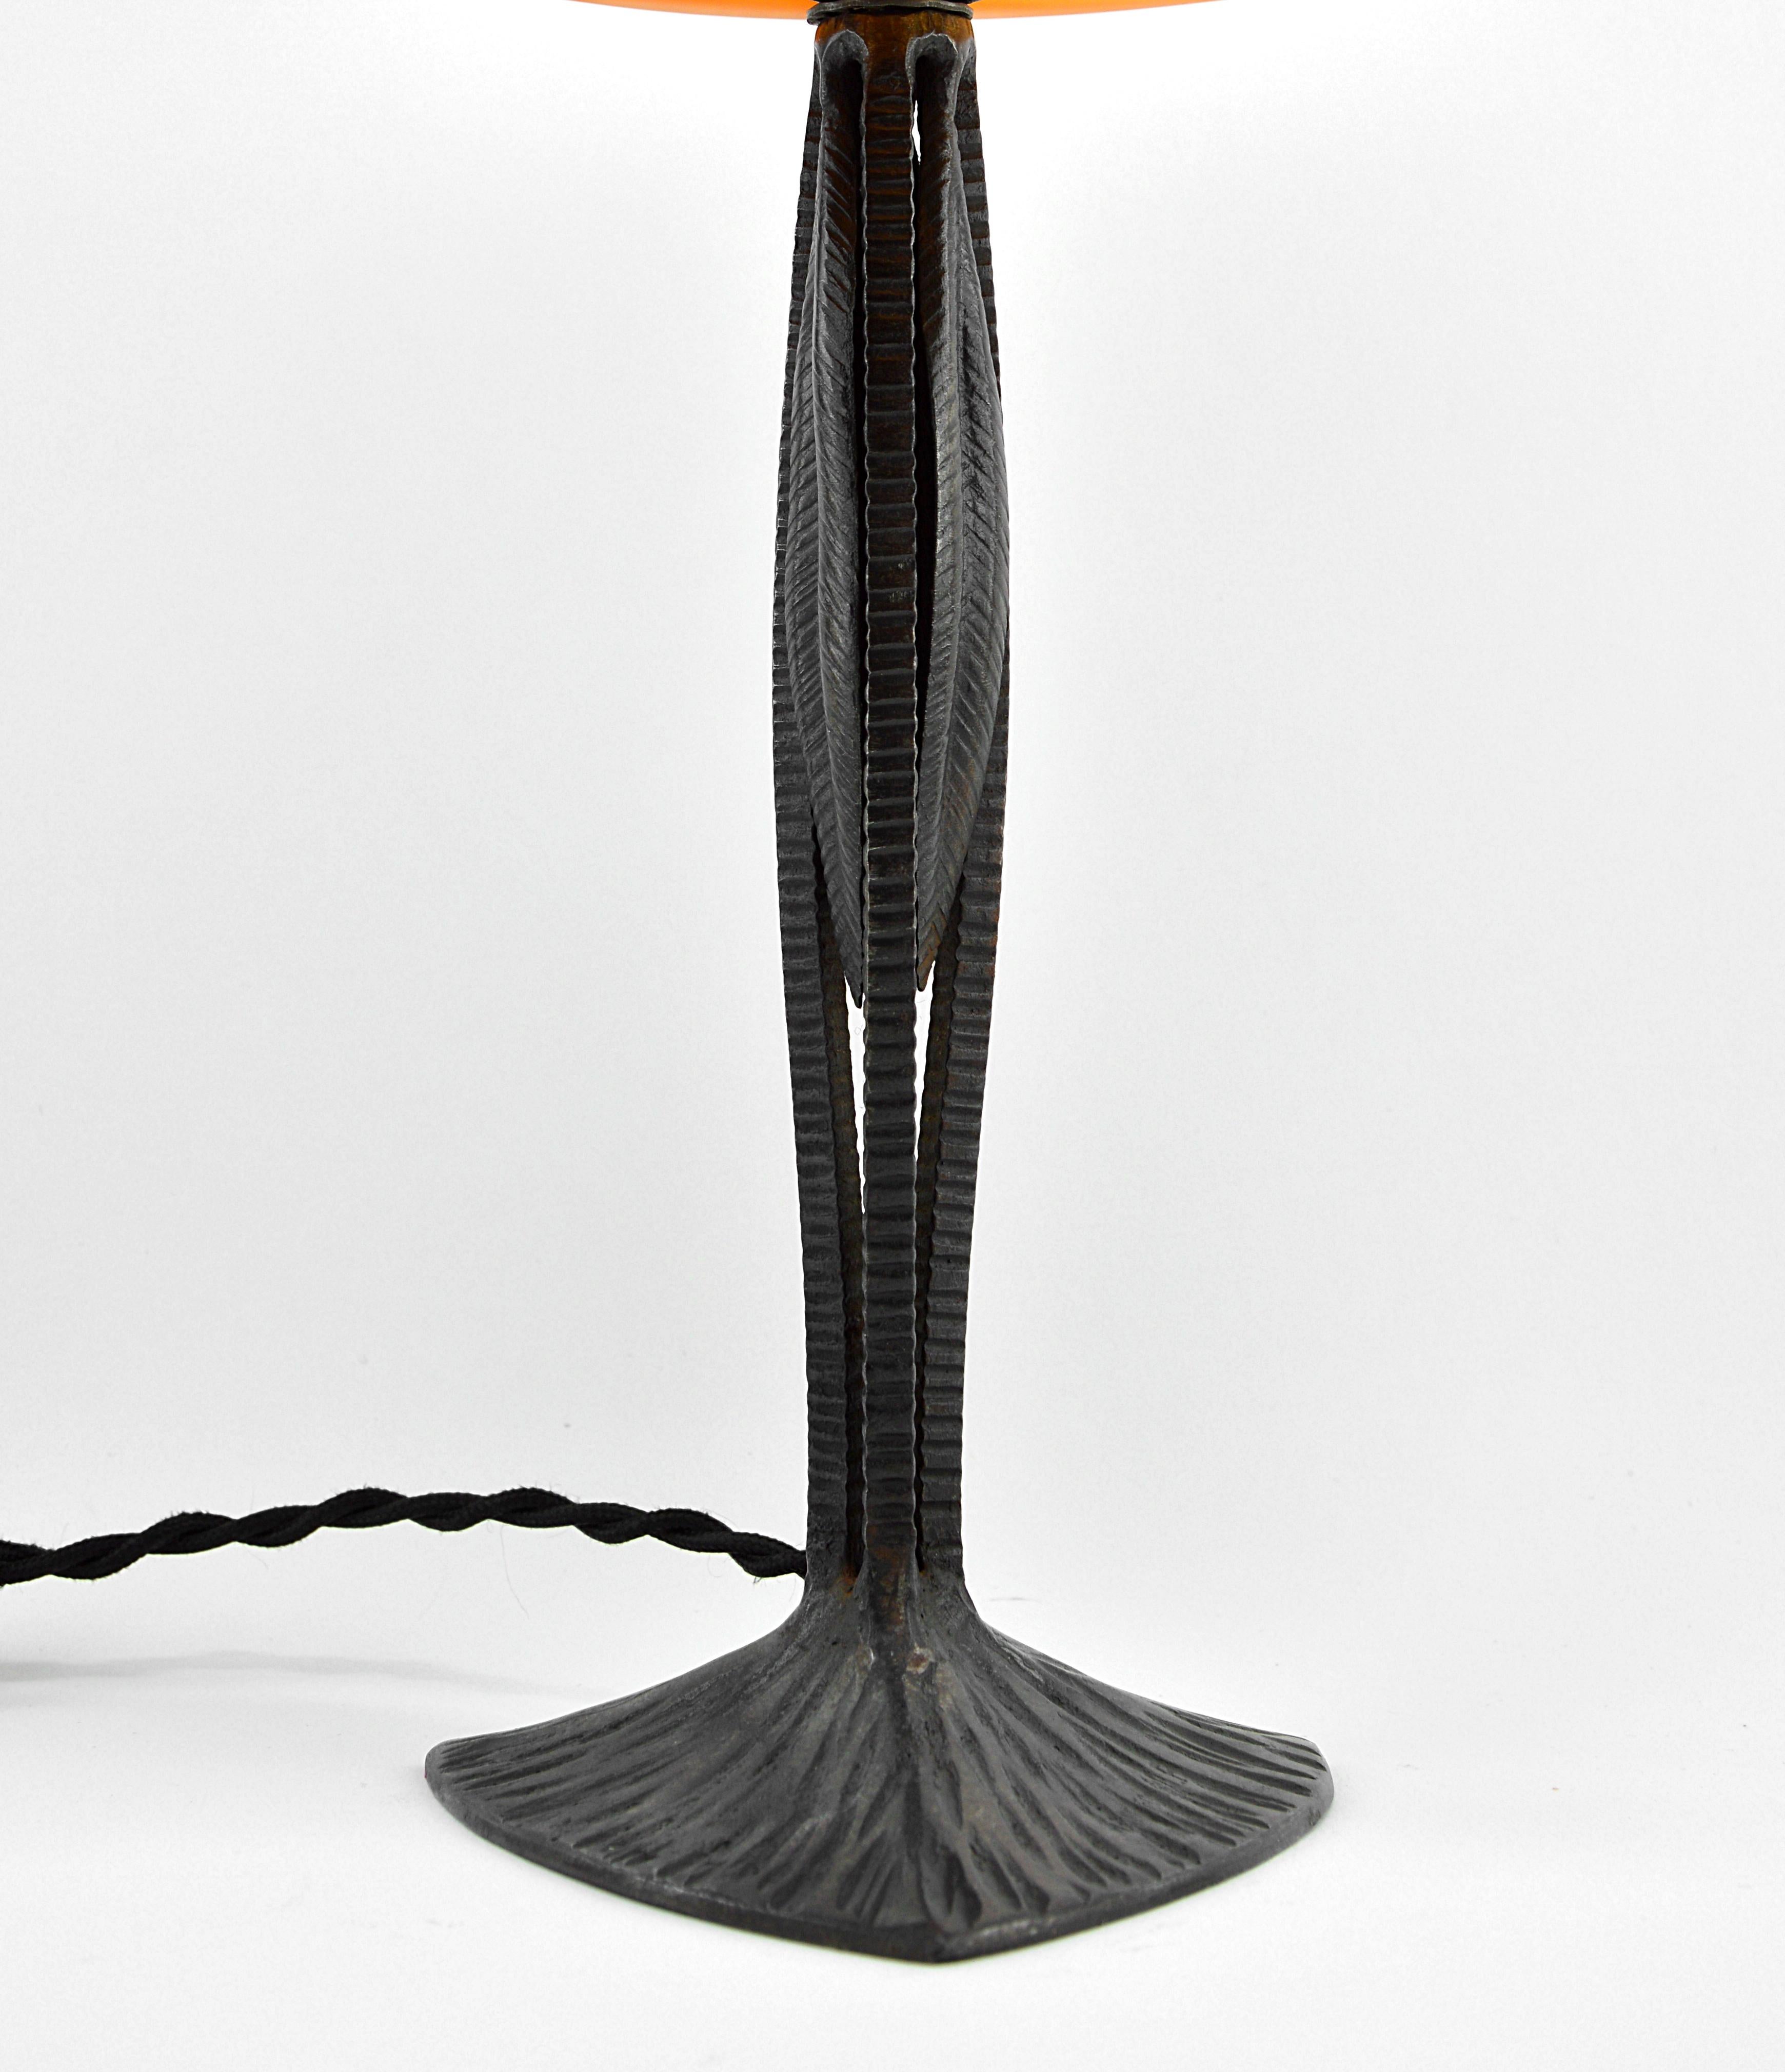 Charles Schneider and Henri Fournet Rare French Art Deco Table Lamp, 1925 For Sale 2